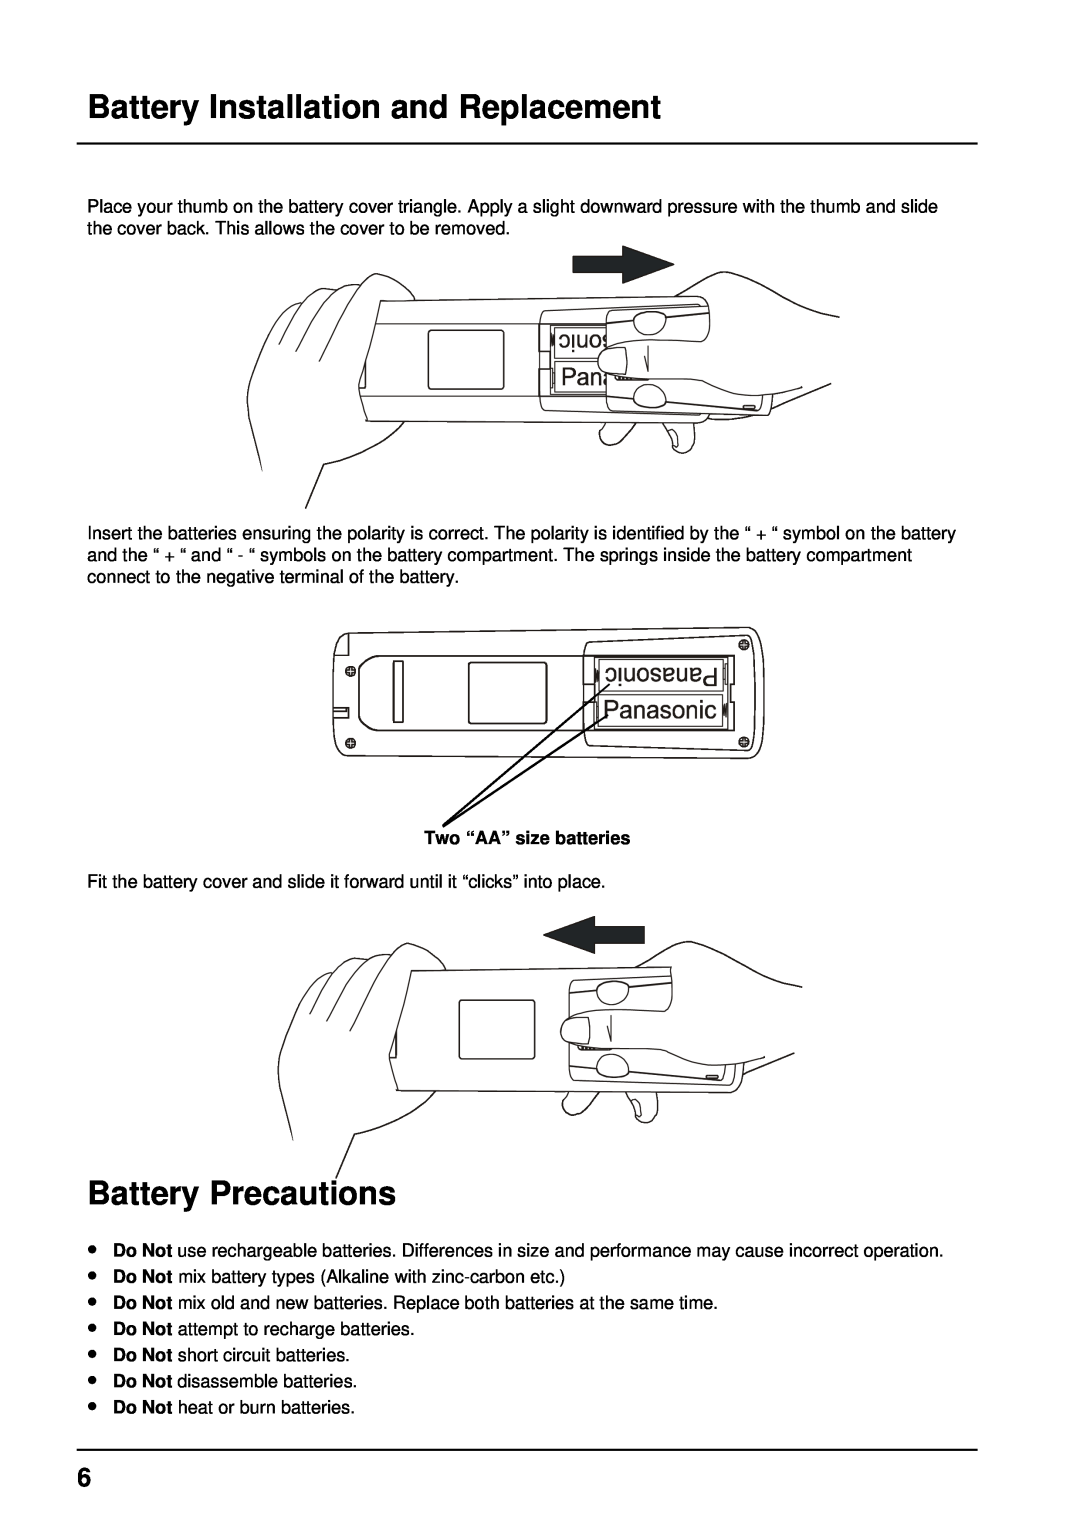 Panasonic TX-68P200A manual Battery Installation and Replacement, Battery Precautions, Two “AA” size batteries 